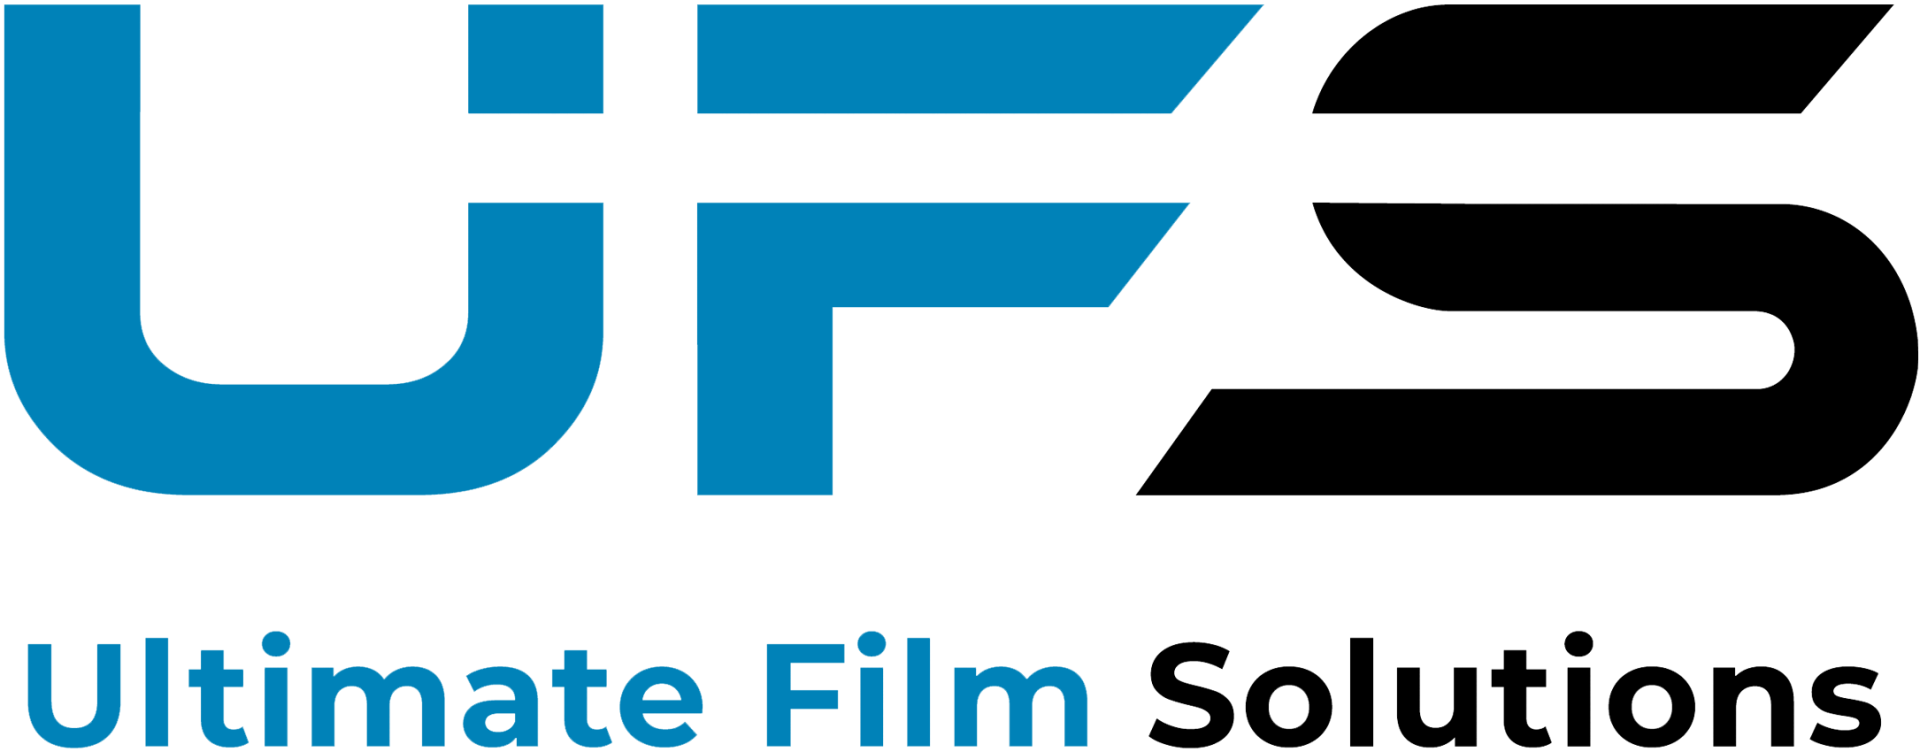 Ultimate Film Solutions